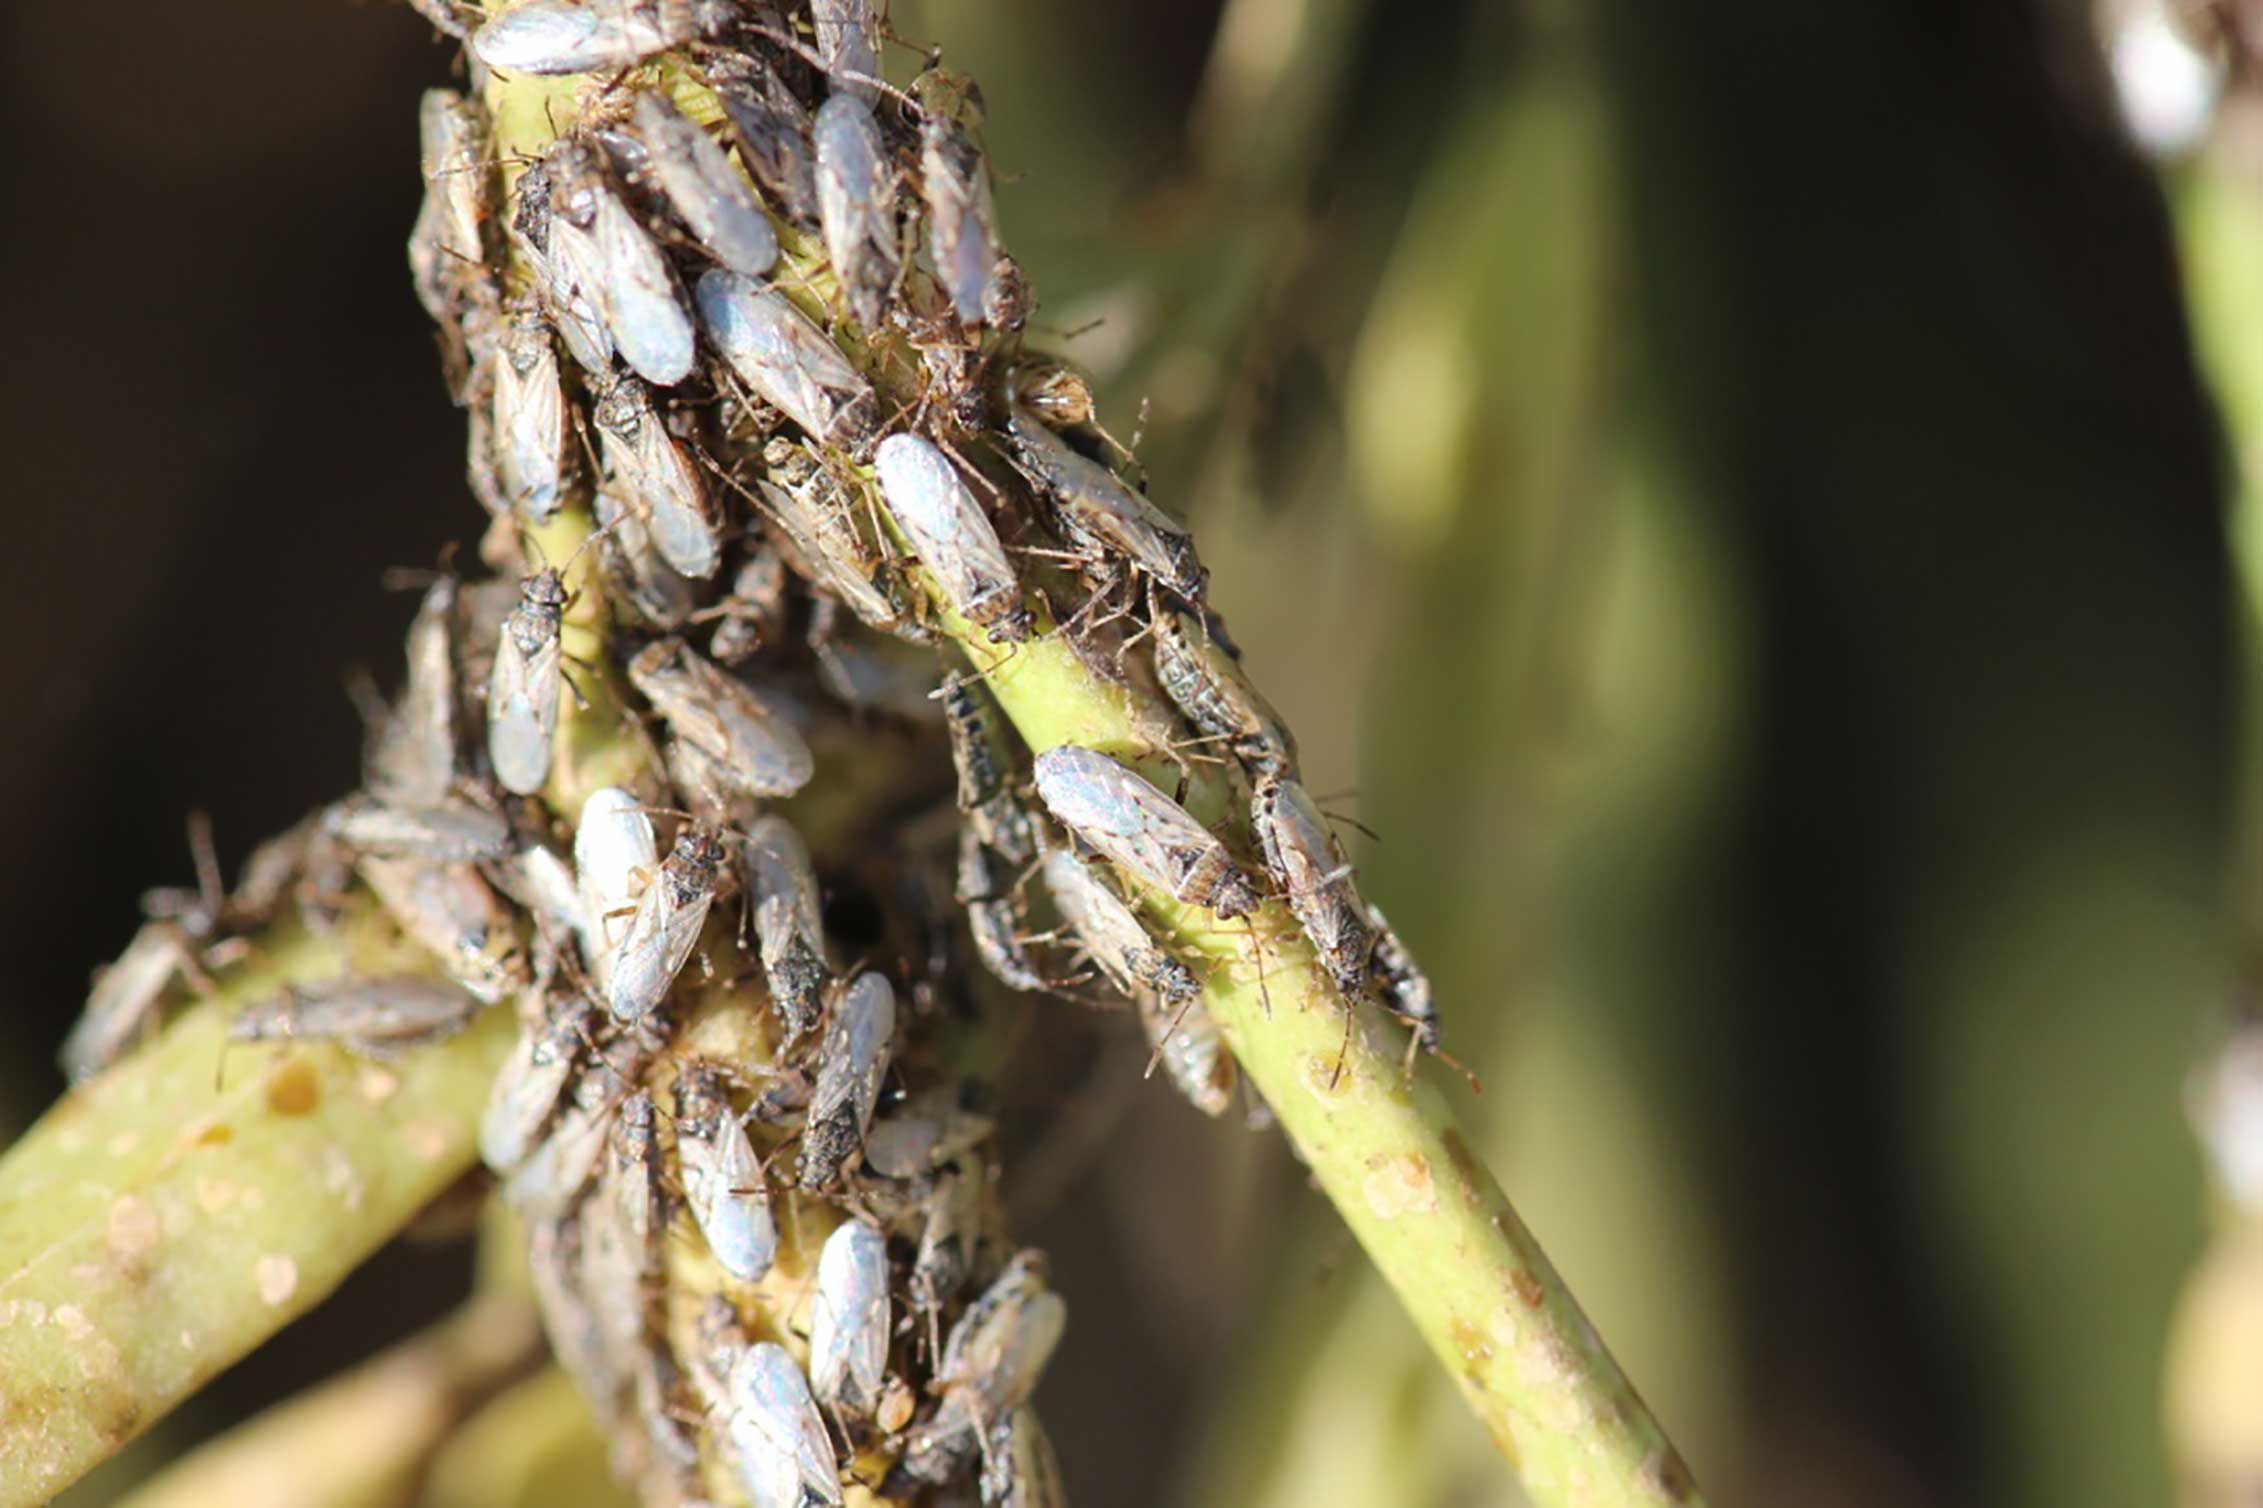 Numerous grayish-brown bugs gathering on a green stem.